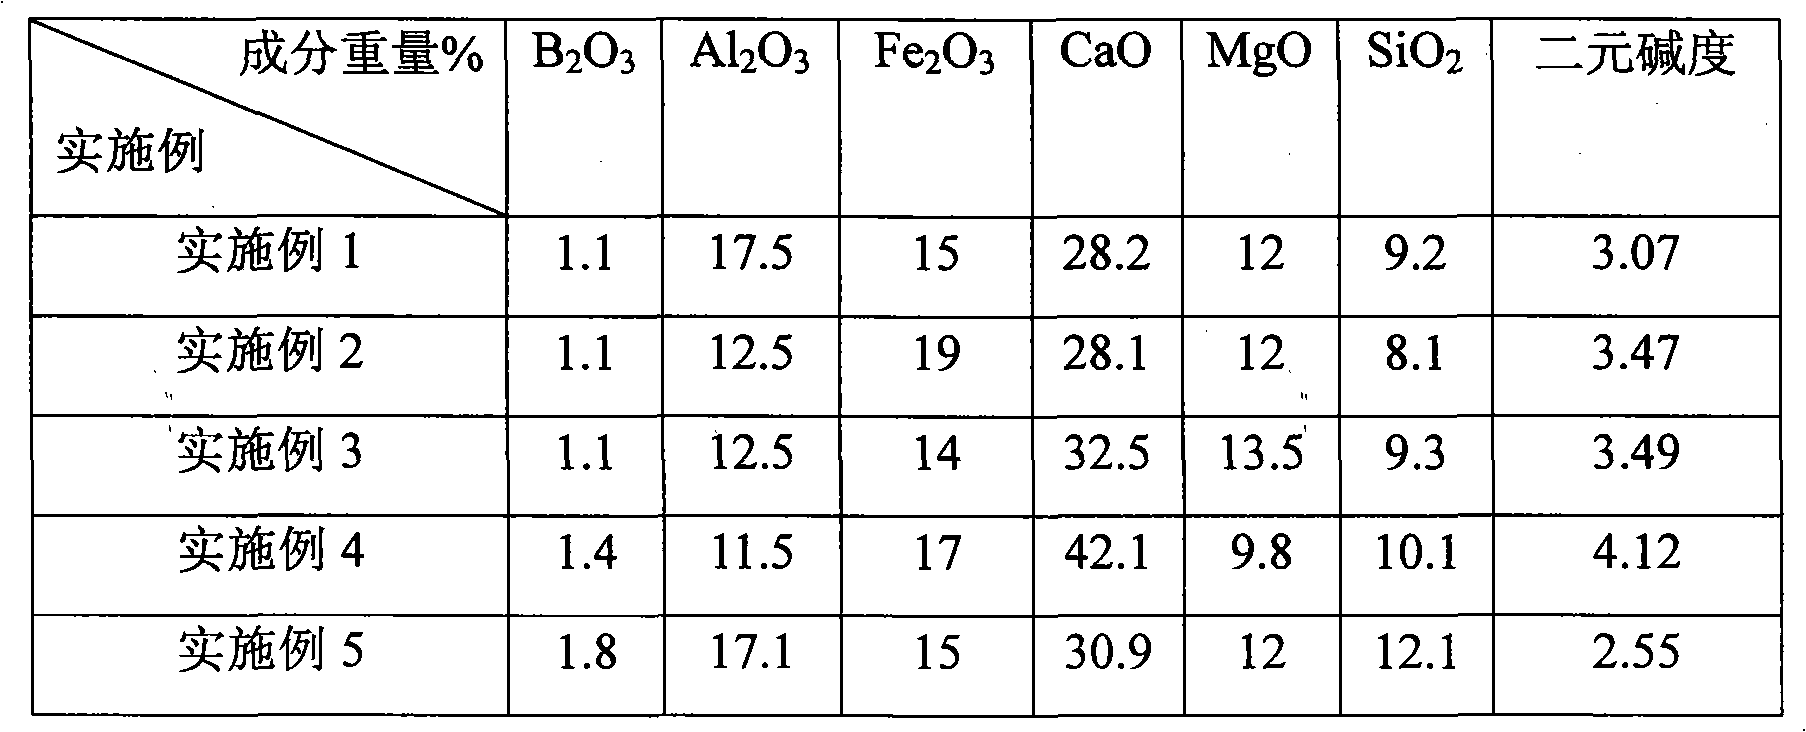 Boron-containing fluorine-free fluxing slag-melting agent for electric steelmaking